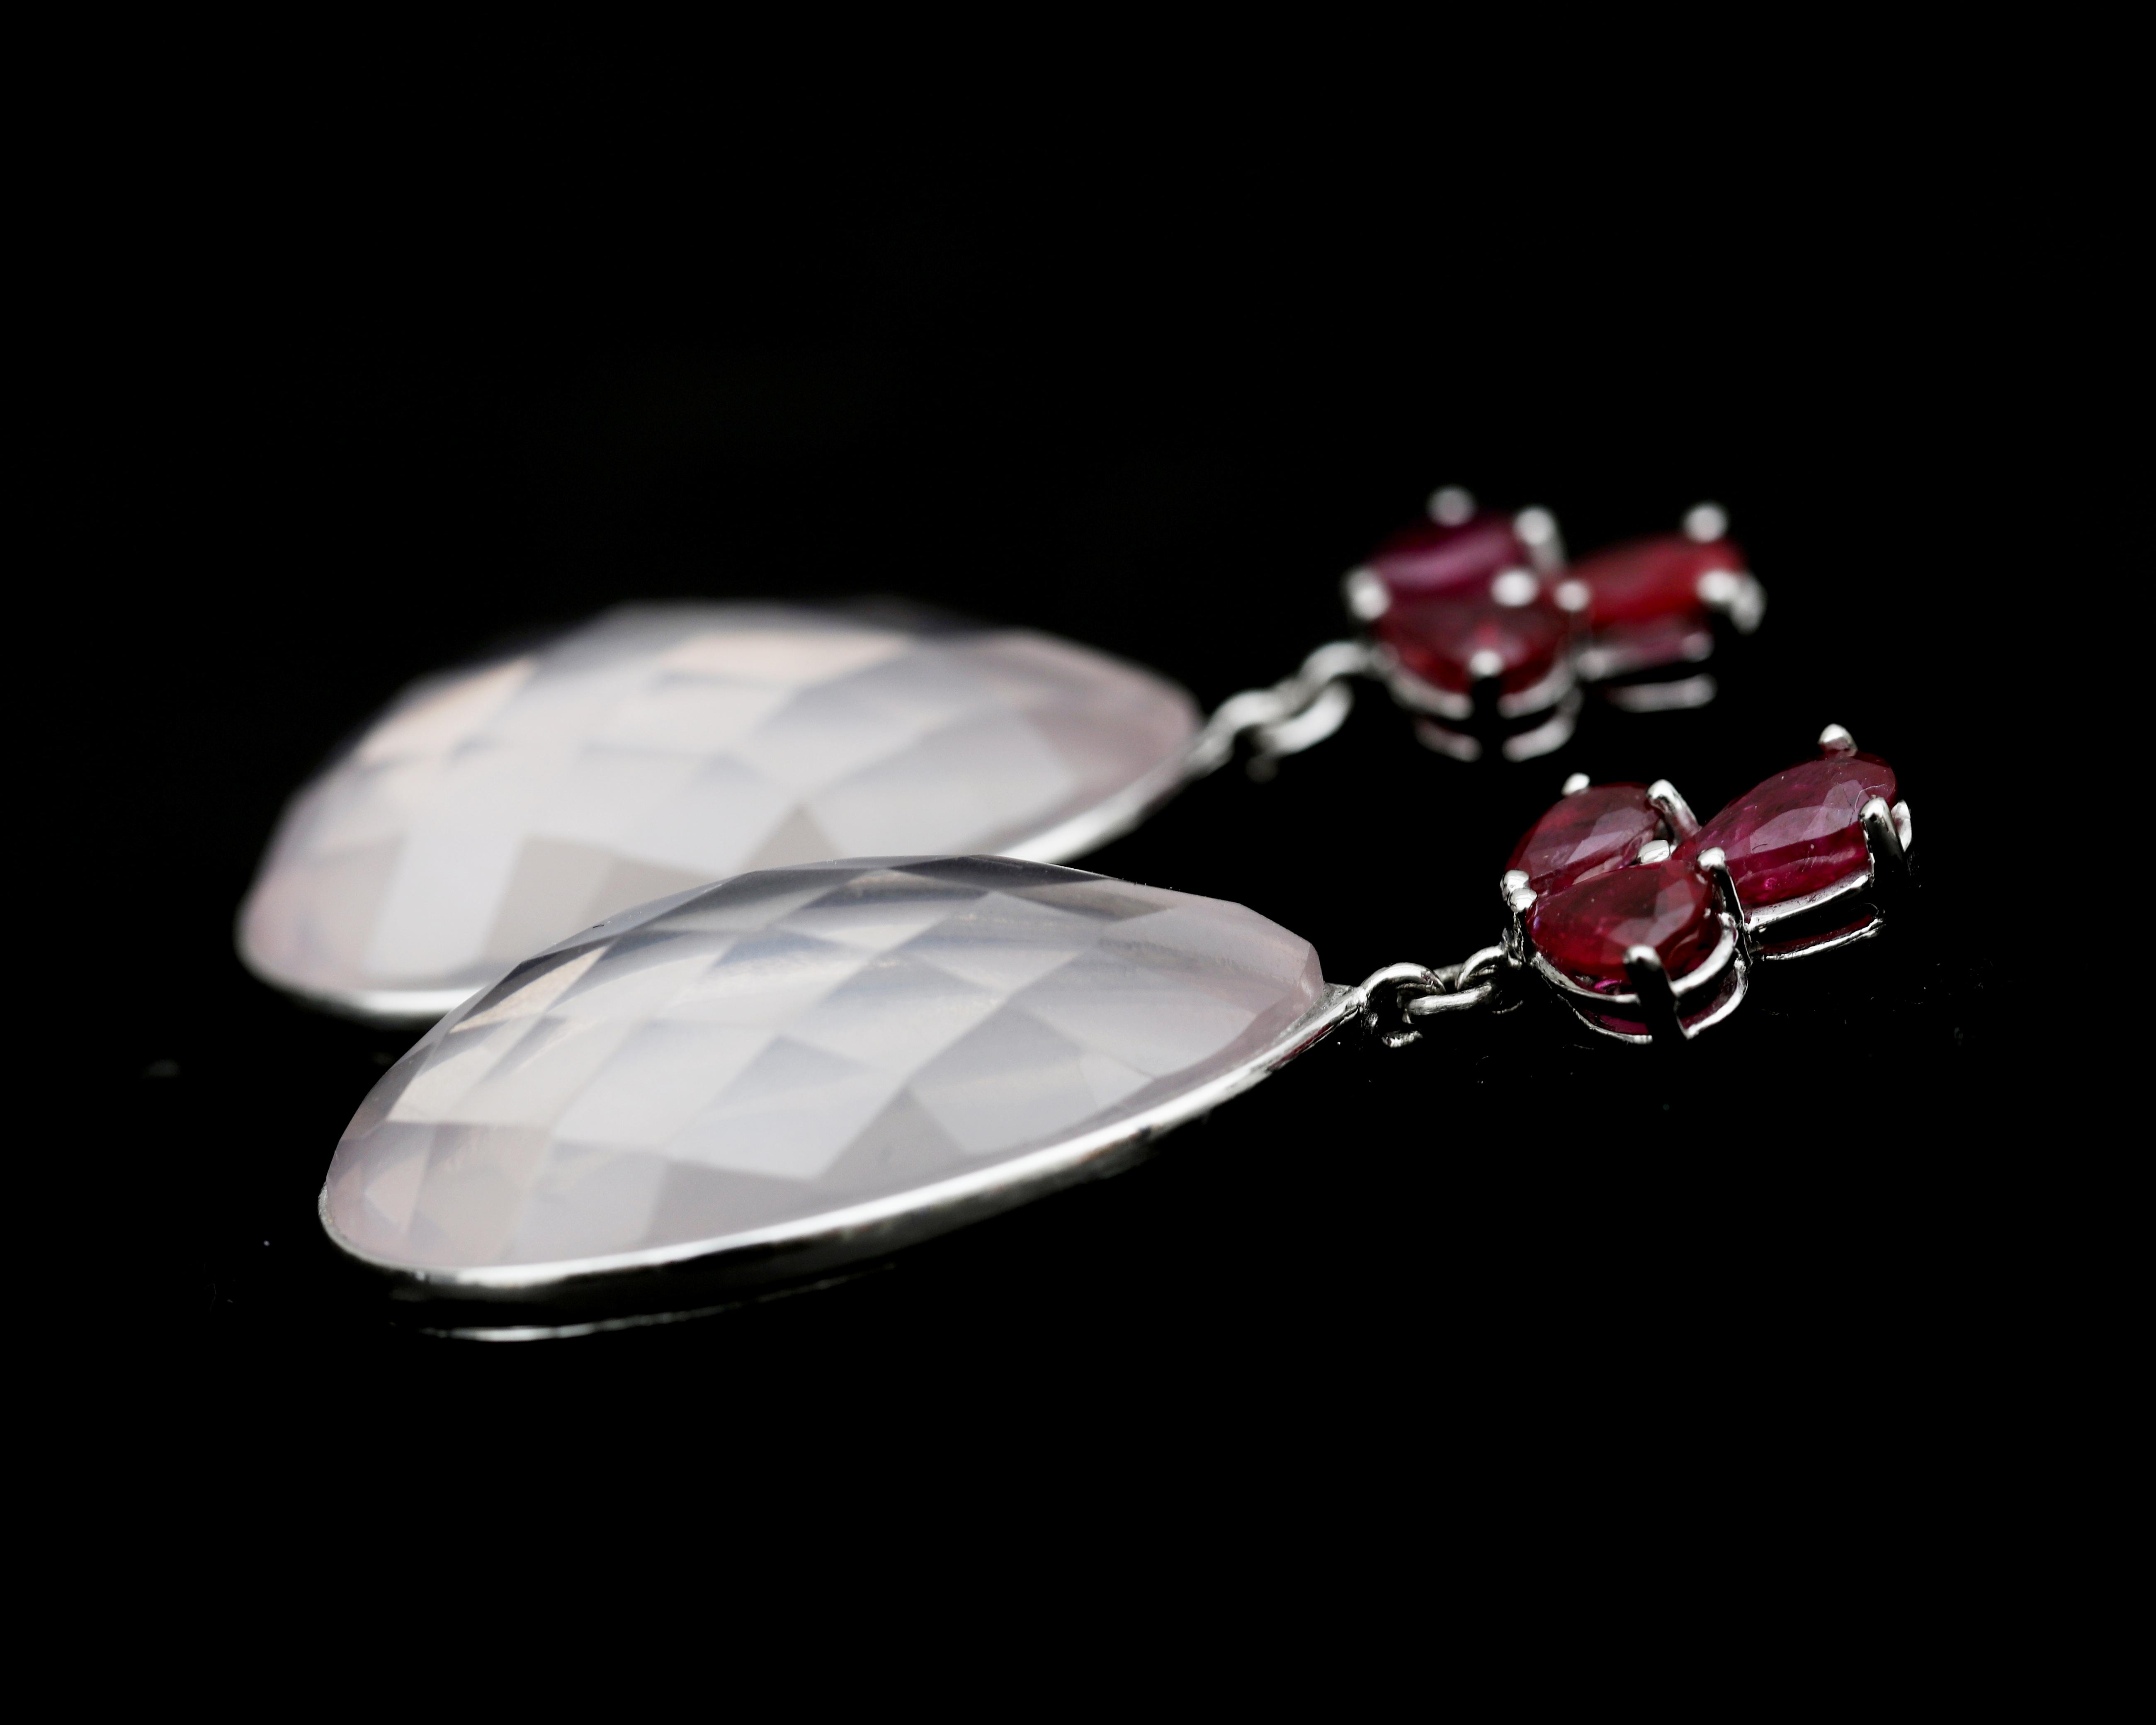 A pair of 14 karat white gold earrings set with rose quartz and six rubies - Image 2 of 3